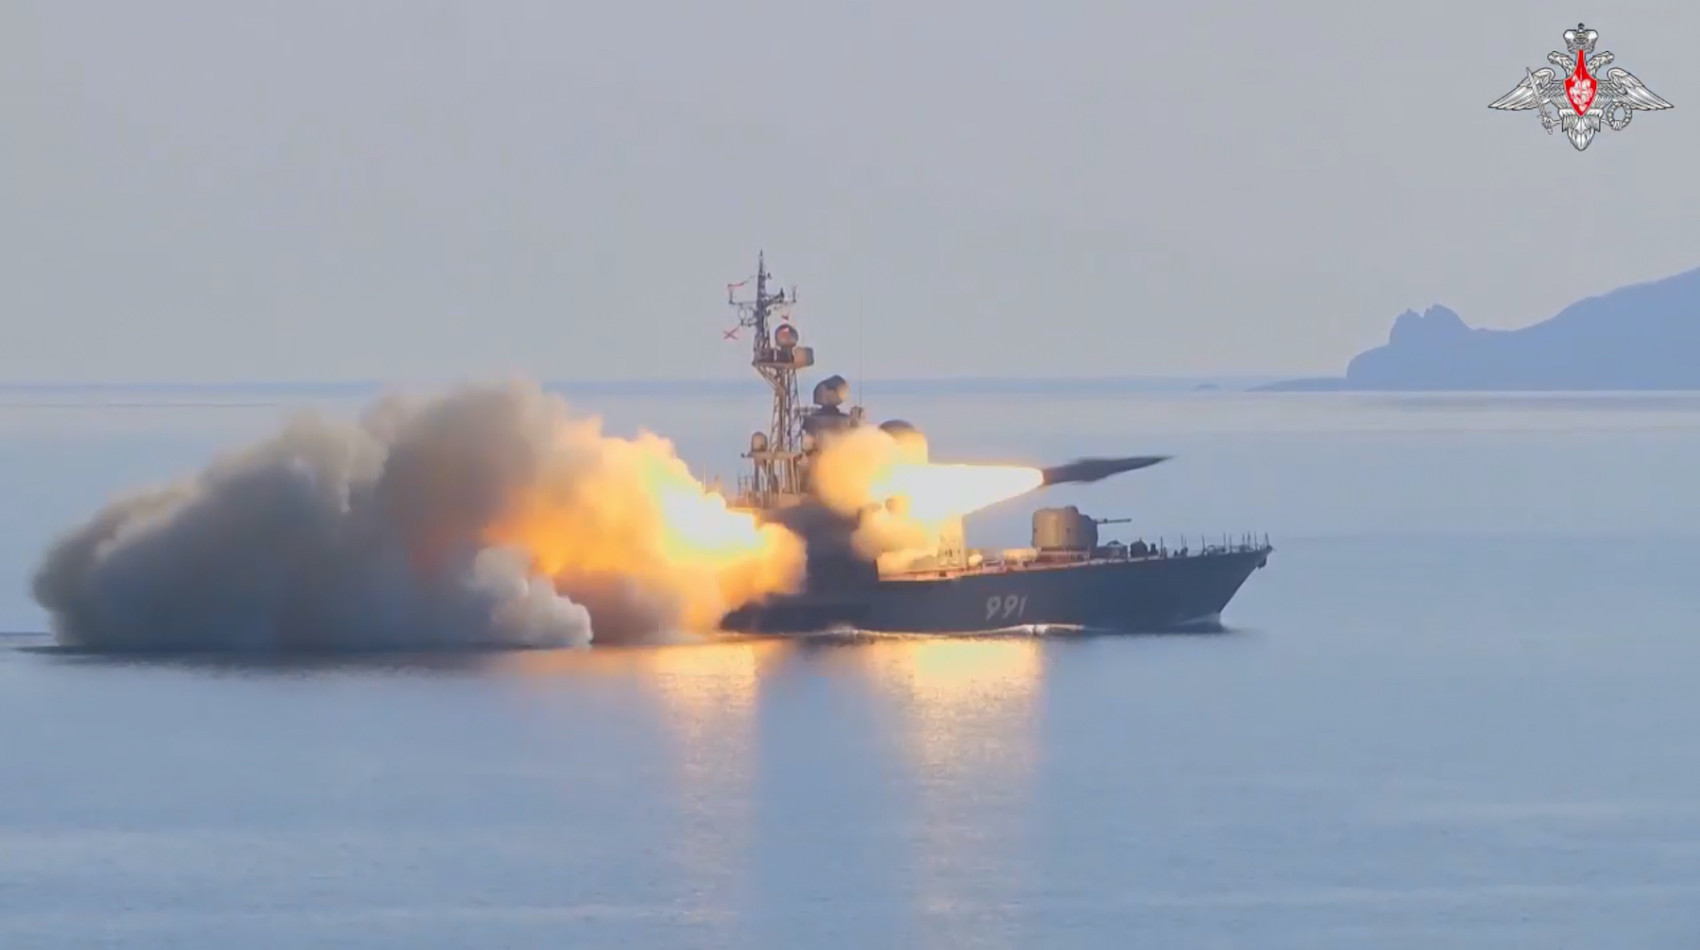 Russian navy boat launches an anti-ship missile test in the Peter The Great Gulf in the Sea of Japan